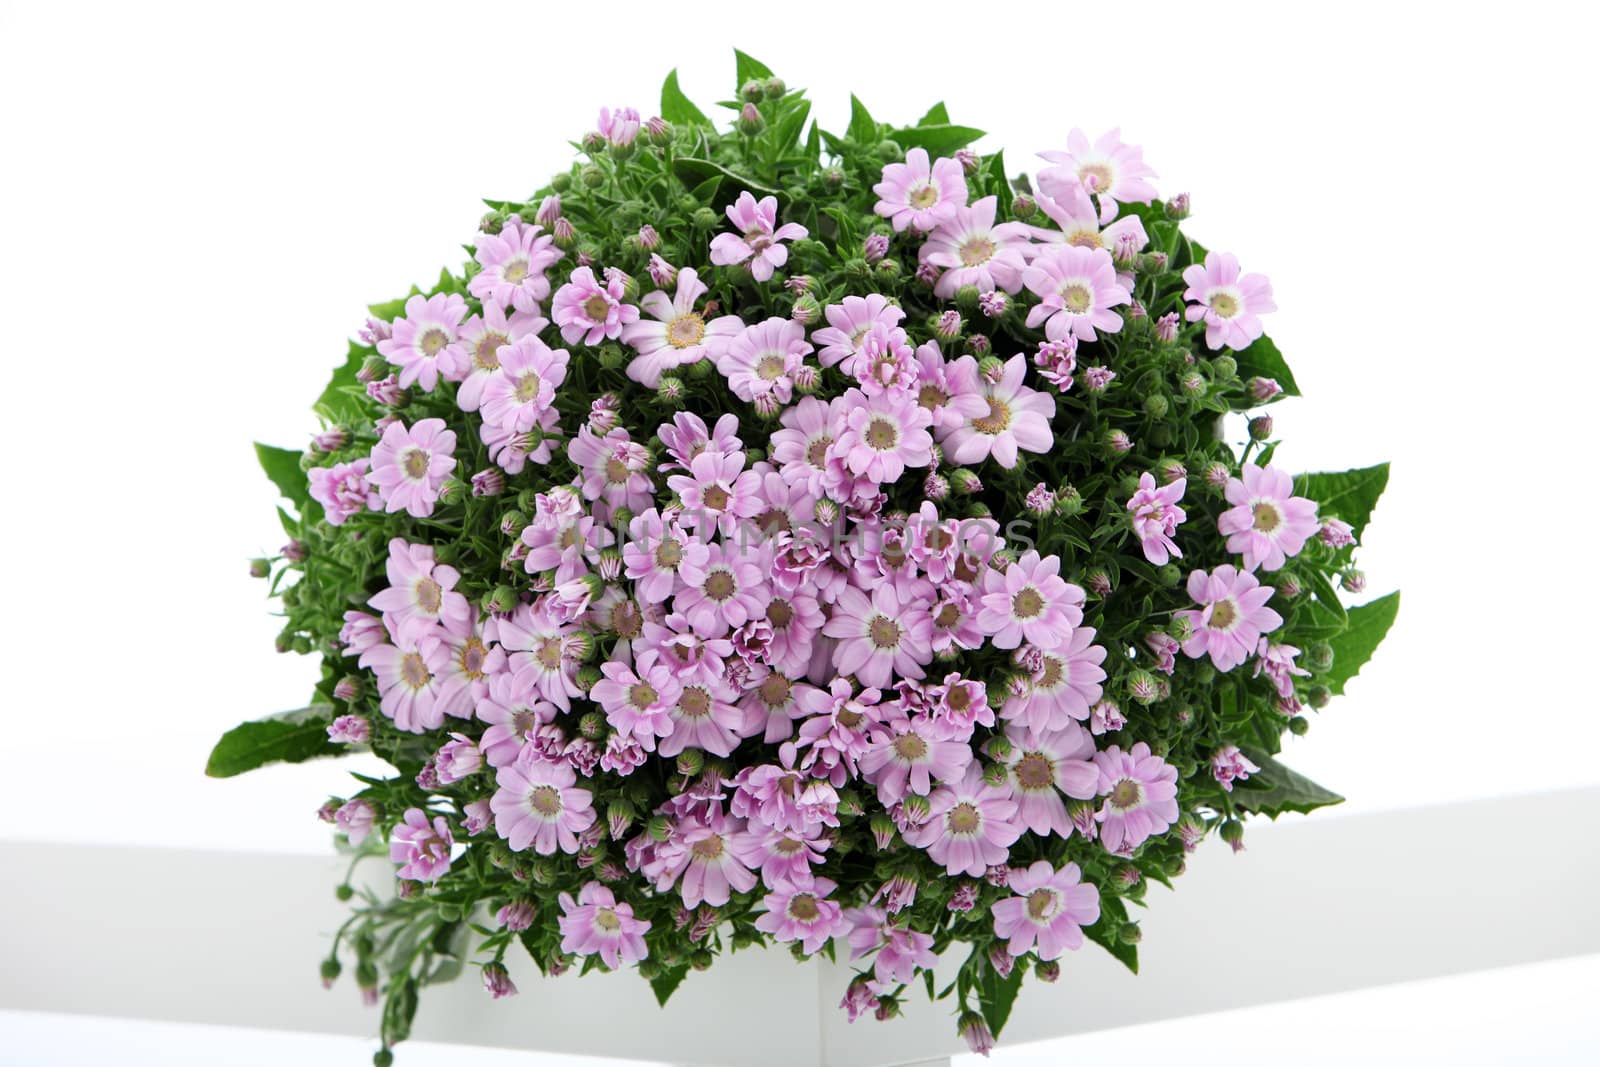 Pretty round floral bouquet of fresh lilac-coloured daises with green foliage on a white background